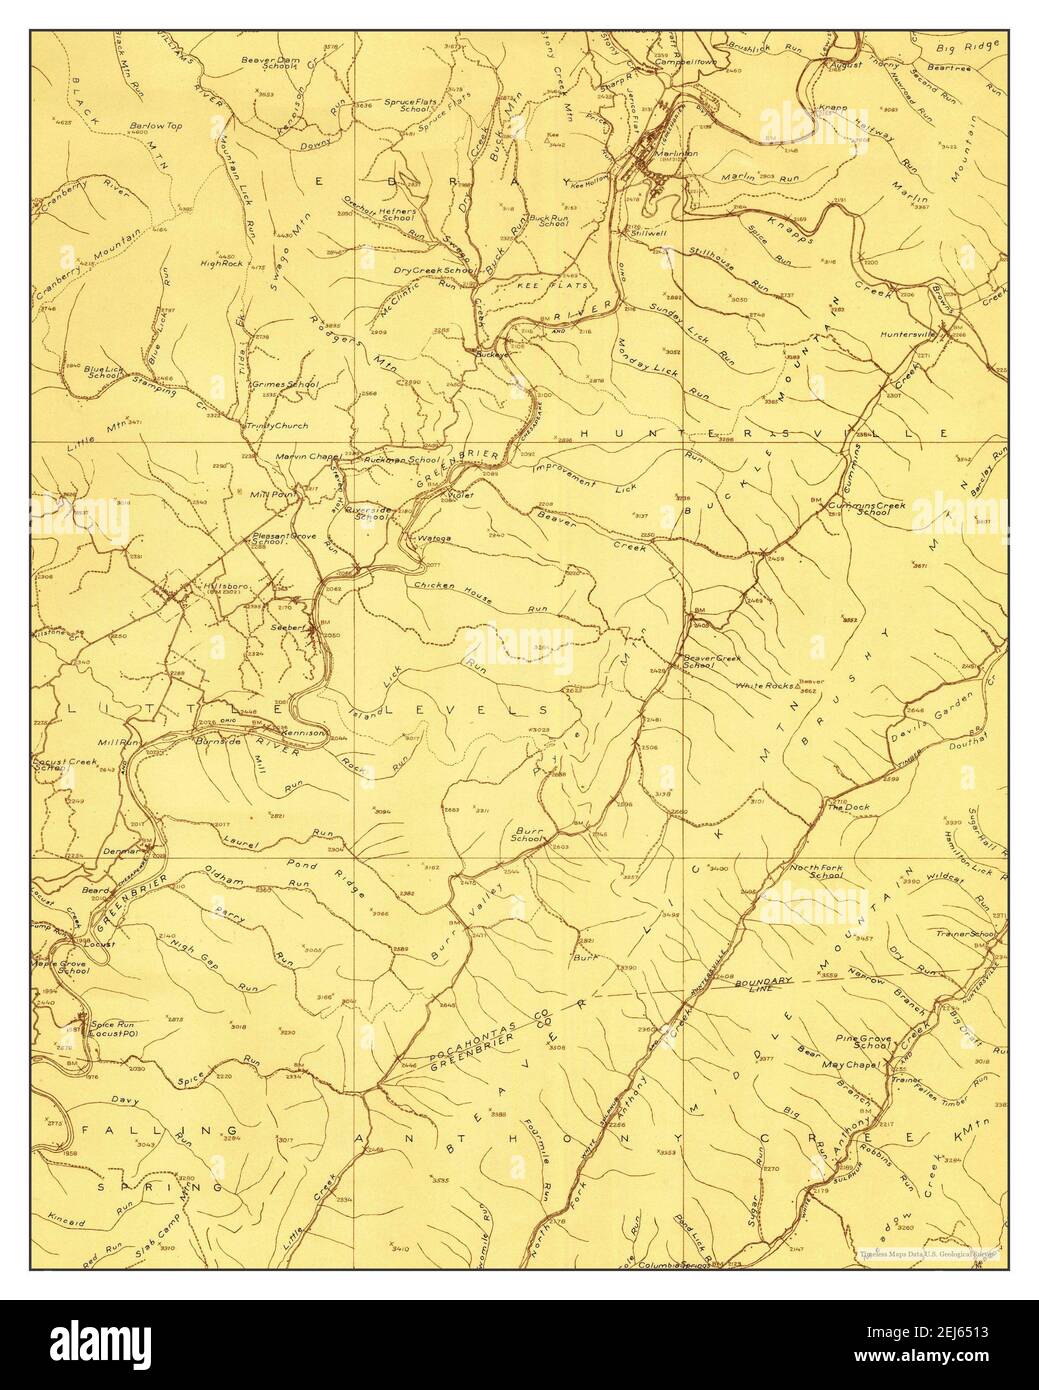 Marlinton, West Virginia, map 1923, 1:48000, United States of America by Timeless Maps, data U.S. Geological Survey Stock Photo